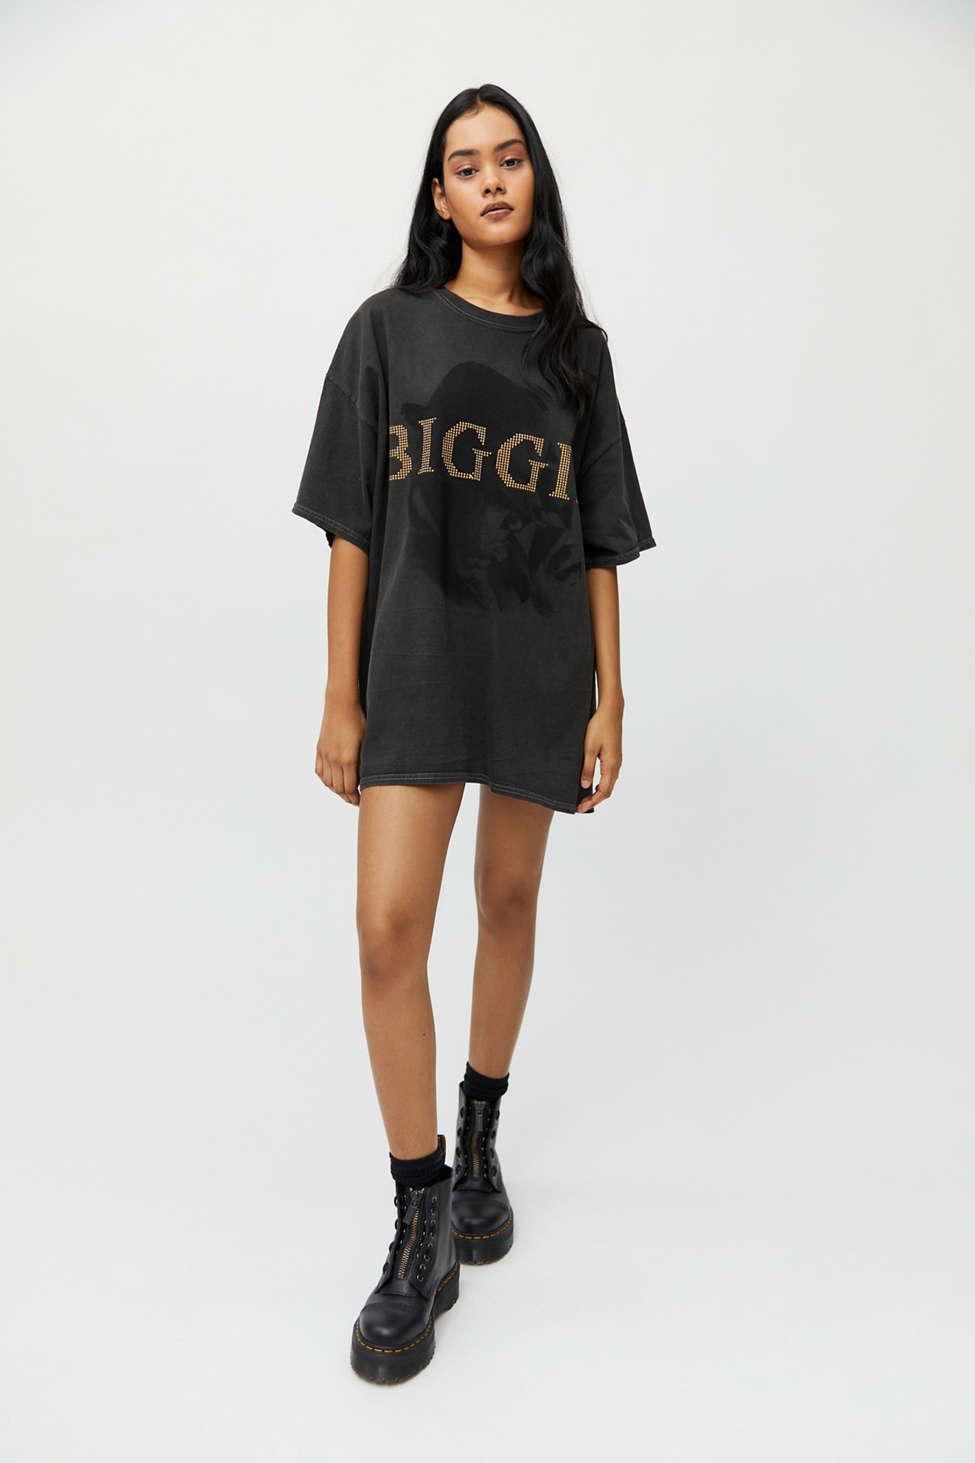 Urban Outfitters The Notorious B.i.g. Diamante T-shirt Dress in Black | Lyst